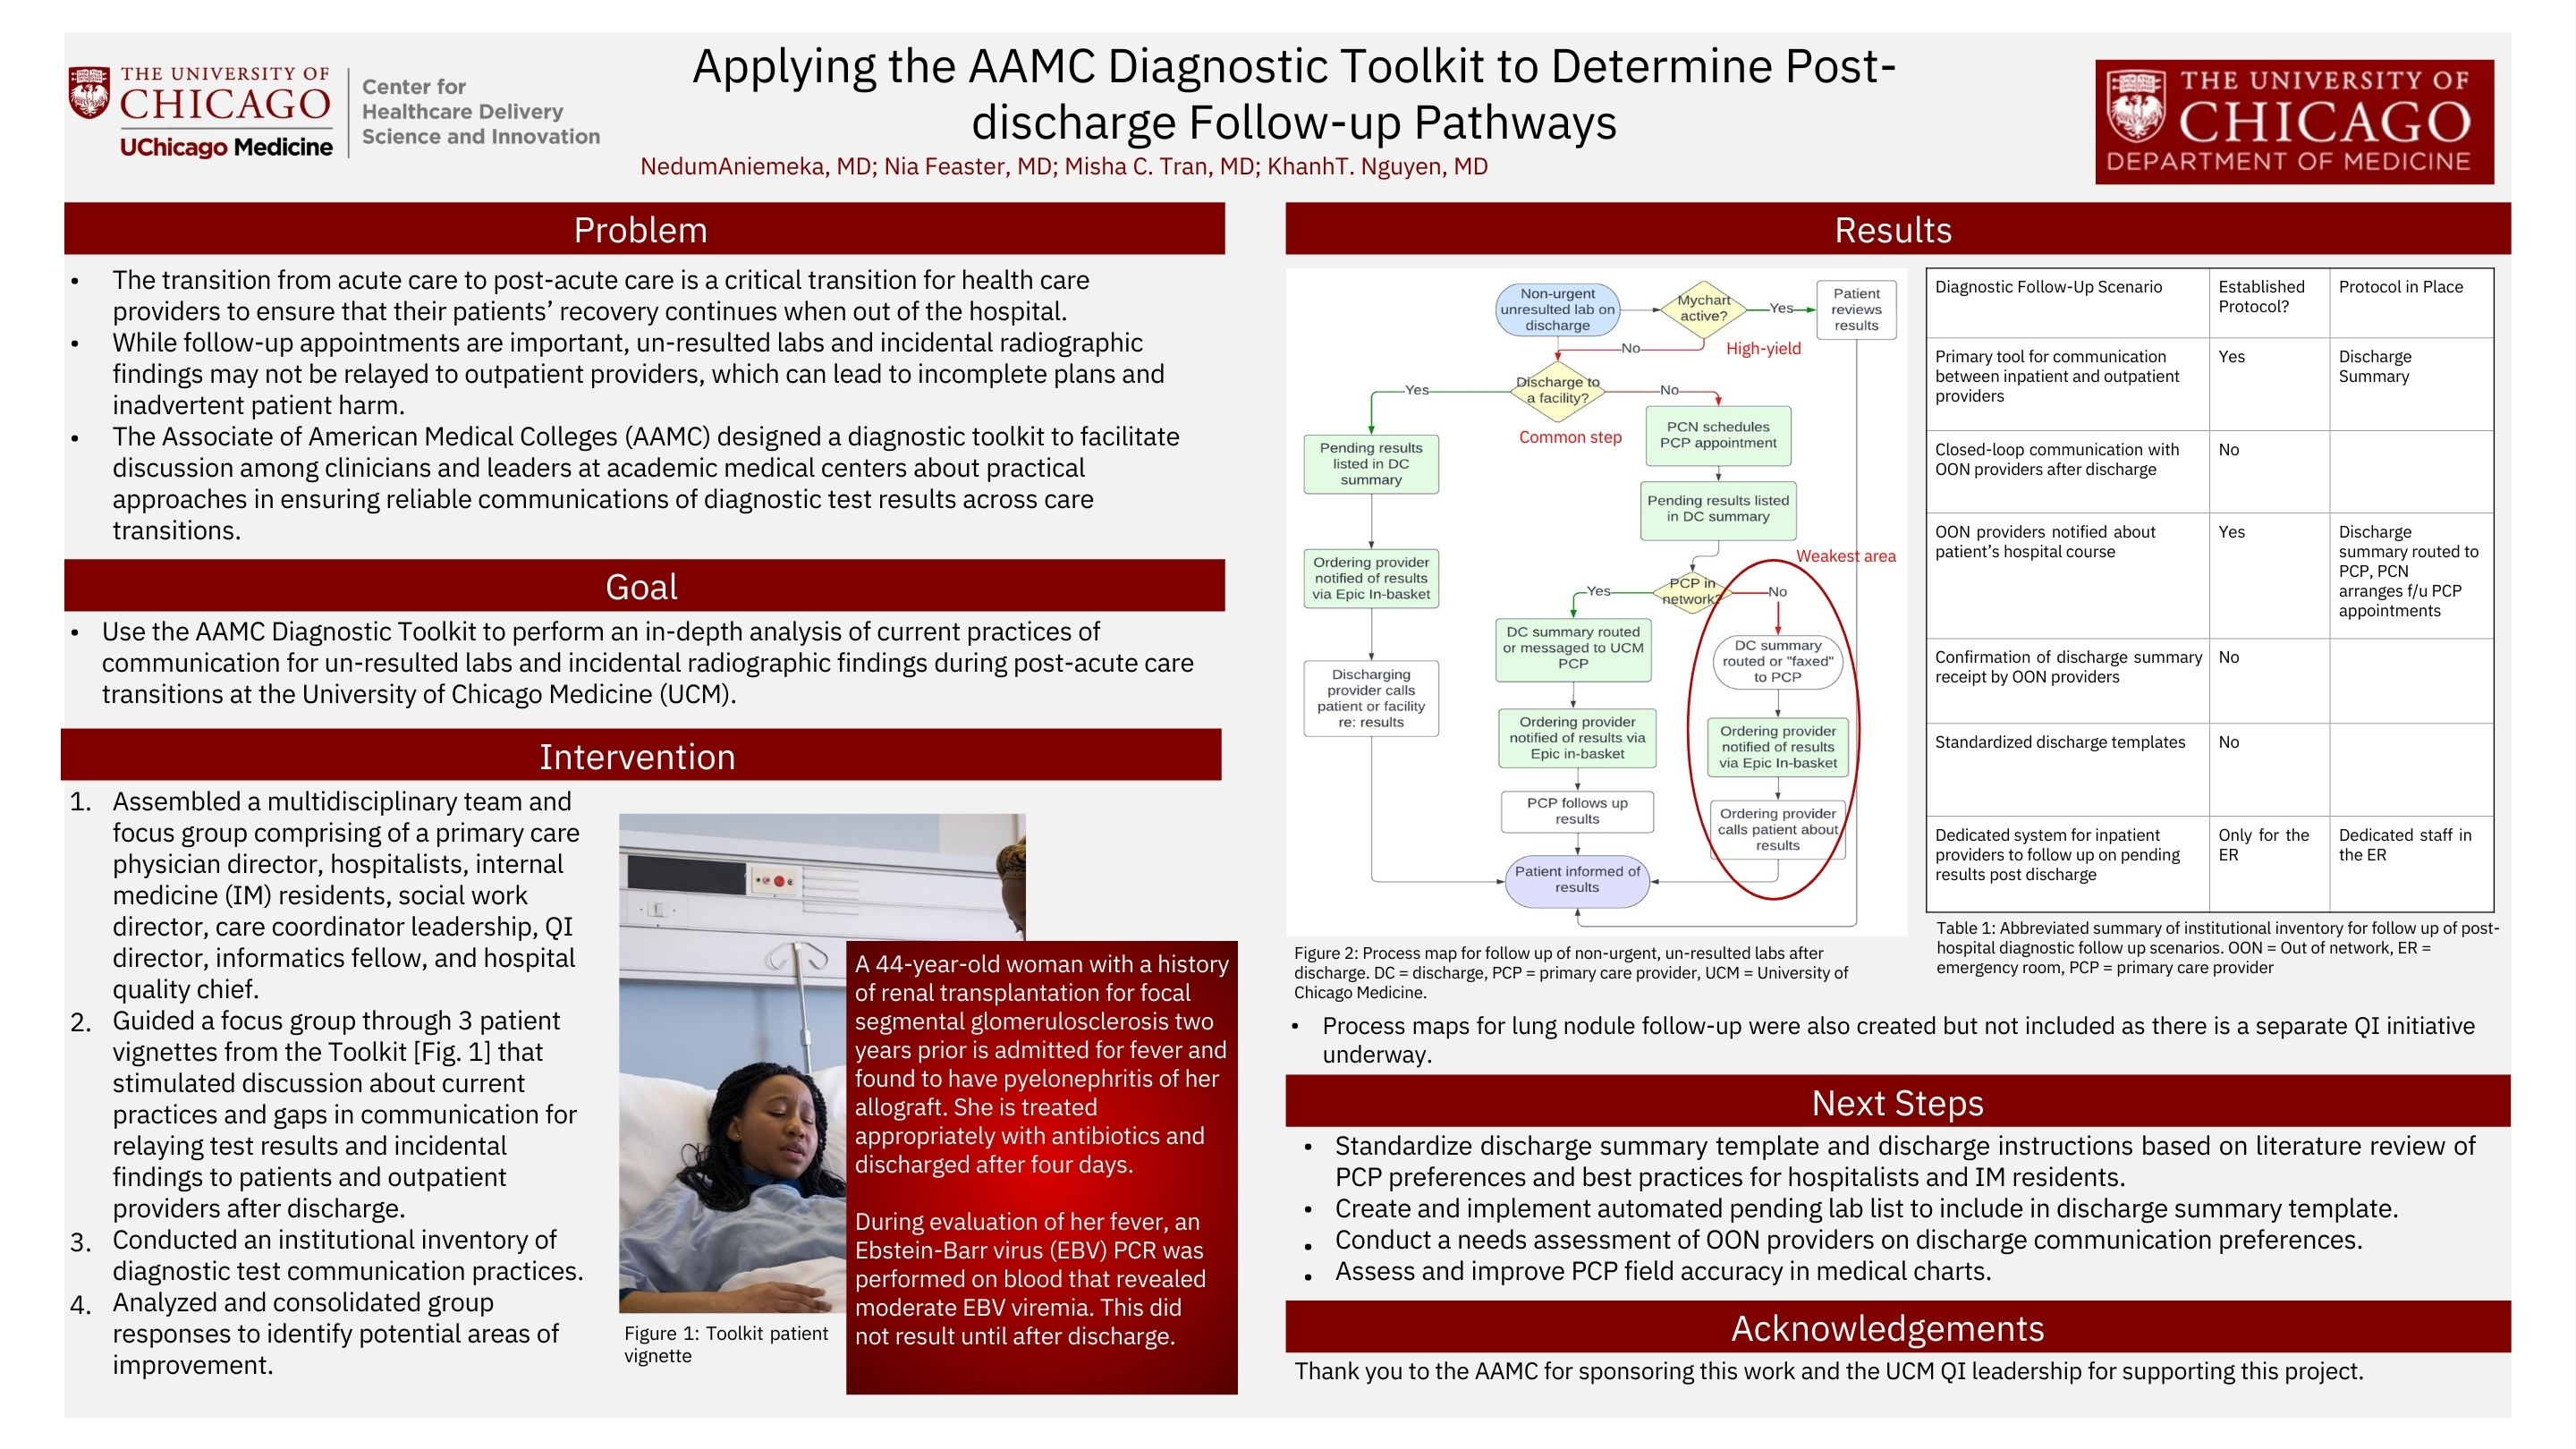 ANIEMEKA_Applying the AAMC Diagnostic Toolkit to Determine Post Discharge Follow Up Pathways